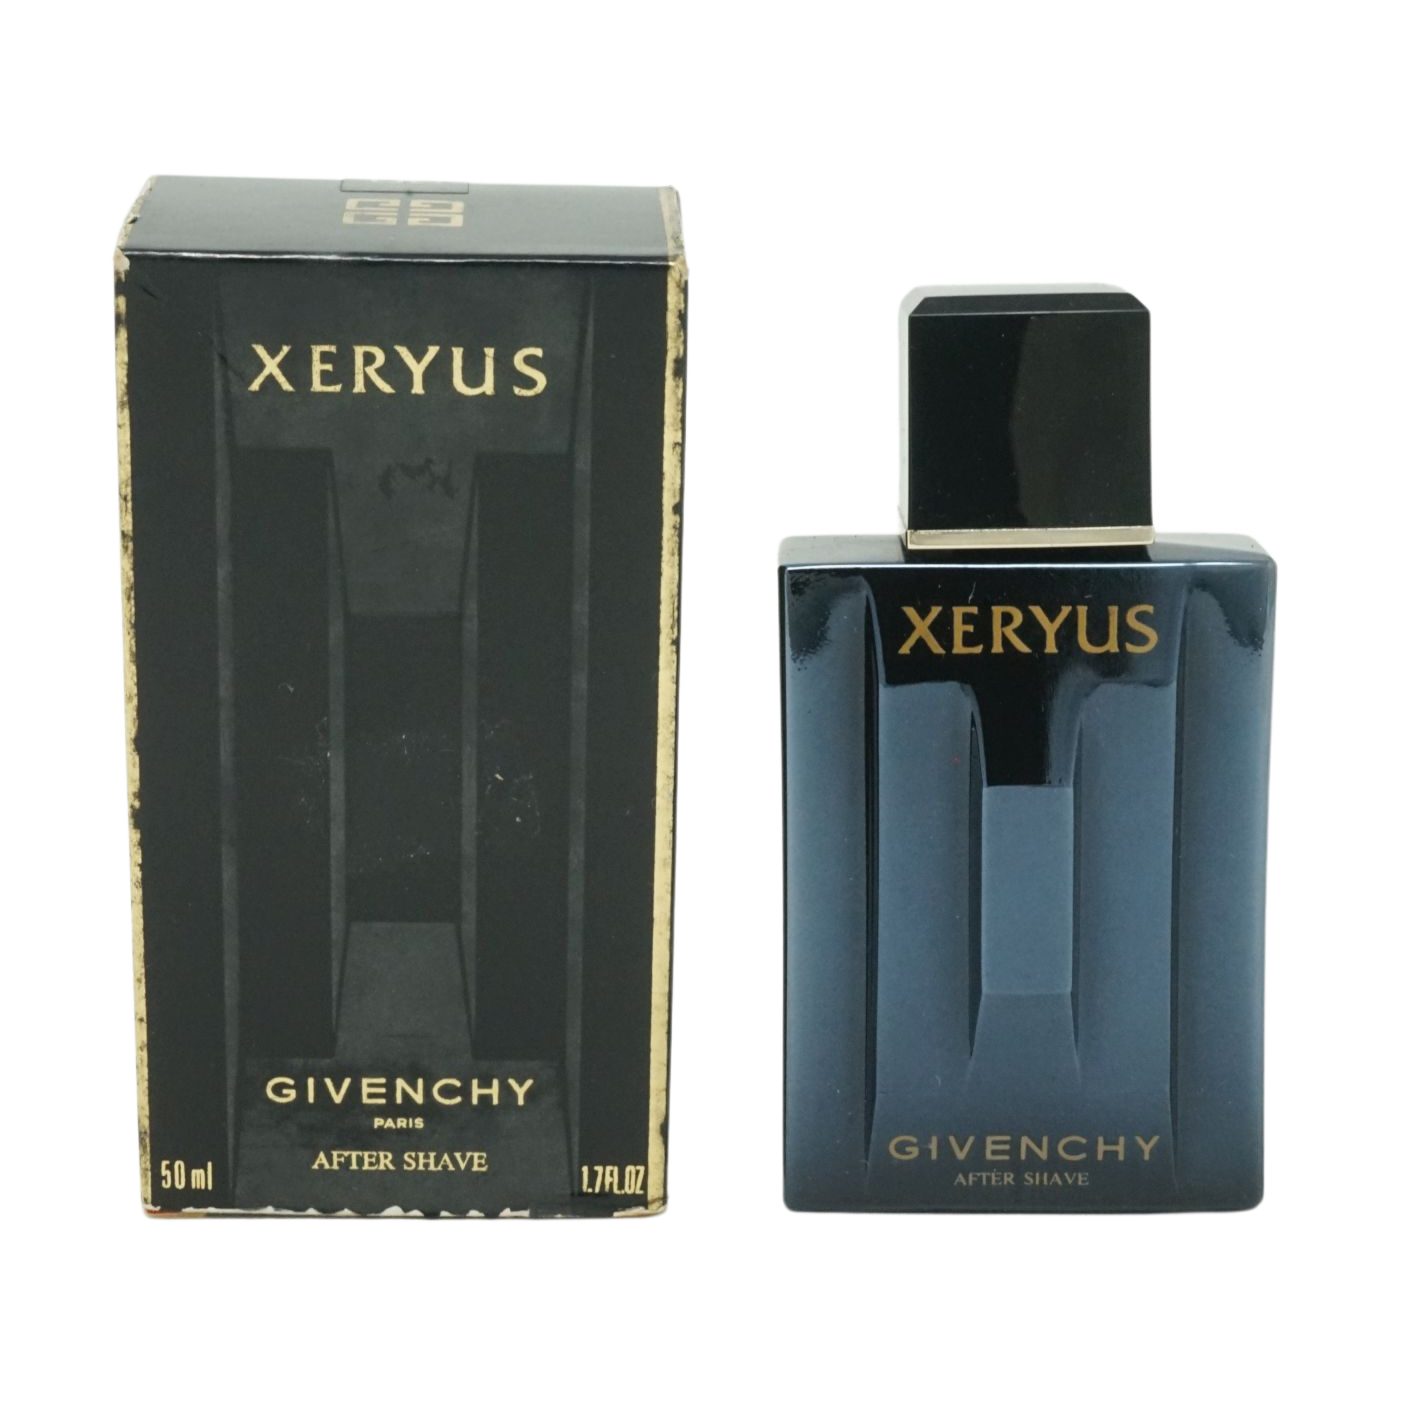 GIVENCHY Xeryus Shave After-Shave Givenchy Paris 50ml After